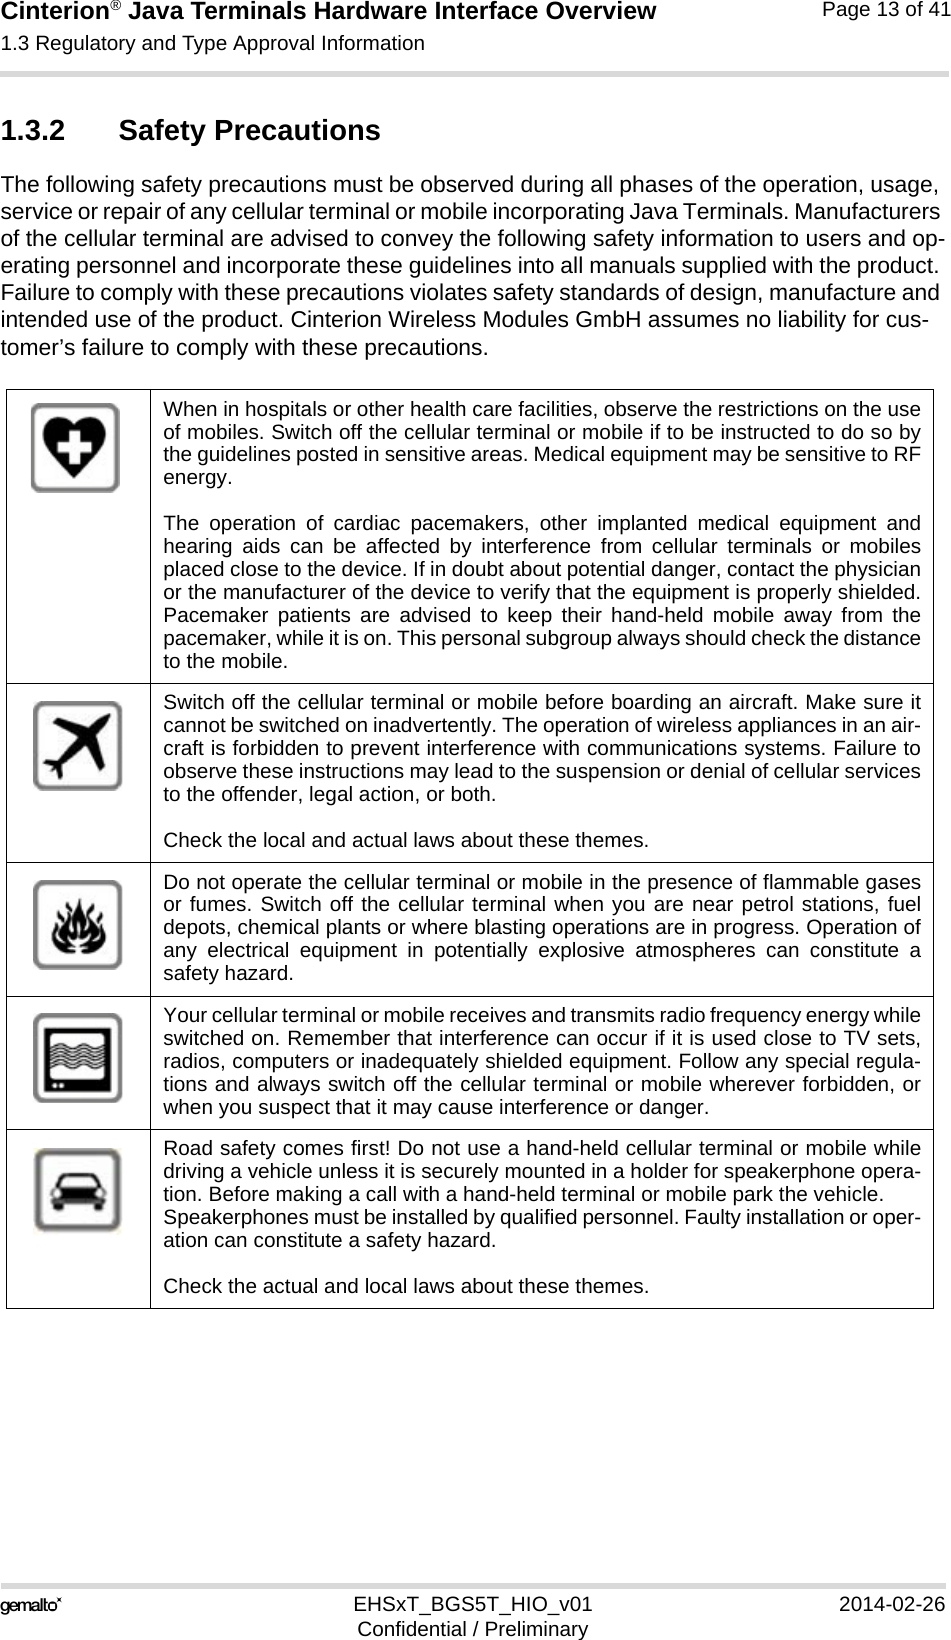 Cinterion® Java Terminals Hardware Interface Overview1.3 Regulatory and Type Approval Information15EHSxT_BGS5T_HIO_v01 2014-02-26Confidential / PreliminaryPage 13 of 411.3.2 Safety PrecautionsThe following safety precautions must be observed during all phases of the operation, usage, service or repair of any cellular terminal or mobile incorporating Java Terminals. Manufacturers of the cellular terminal are advised to convey the following safety information to users and op-erating personnel and incorporate these guidelines into all manuals supplied with the product. Failure to comply with these precautions violates safety standards of design, manufacture and intended use of the product. Cinterion Wireless Modules GmbH assumes no liability for cus-tomer’s failure to comply with these precautions.When in hospitals or other health care facilities, observe the restrictions on the useof mobiles. Switch off the cellular terminal or mobile if to be instructed to do so bythe guidelines posted in sensitive areas. Medical equipment may be sensitive to RFenergy. The operation of cardiac pacemakers, other implanted medical equipment andhearing aids can be affected by interference from cellular terminals or mobilesplaced close to the device. If in doubt about potential danger, contact the physicianor the manufacturer of the device to verify that the equipment is properly shielded.Pacemaker patients are advised to keep their hand-held mobile away from thepacemaker, while it is on. This personal subgroup always should check the distanceto the mobile.Switch off the cellular terminal or mobile before boarding an aircraft. Make sure itcannot be switched on inadvertently. The operation of wireless appliances in an air-craft is forbidden to prevent interference with communications systems. Failure toobserve these instructions may lead to the suspension or denial of cellular servicesto the offender, legal action, or both. Check the local and actual laws about these themes.Do not operate the cellular terminal or mobile in the presence of flammable gasesor fumes. Switch off the cellular terminal when you are near petrol stations, fueldepots, chemical plants or where blasting operations are in progress. Operation ofany electrical equipment in potentially explosive atmospheres can constitute asafety hazard.Your cellular terminal or mobile receives and transmits radio frequency energy whileswitched on. Remember that interference can occur if it is used close to TV sets,radios, computers or inadequately shielded equipment. Follow any special regula-tions and always switch off the cellular terminal or mobile wherever forbidden, orwhen you suspect that it may cause interference or danger.Road safety comes first! Do not use a hand-held cellular terminal or mobile whiledriving a vehicle unless it is securely mounted in a holder for speakerphone opera-tion. Before making a call with a hand-held terminal or mobile park the vehicle. Speakerphones must be installed by qualified personnel. Faulty installation or oper-ation can constitute a safety hazard.Check the actual and local laws about these themes.